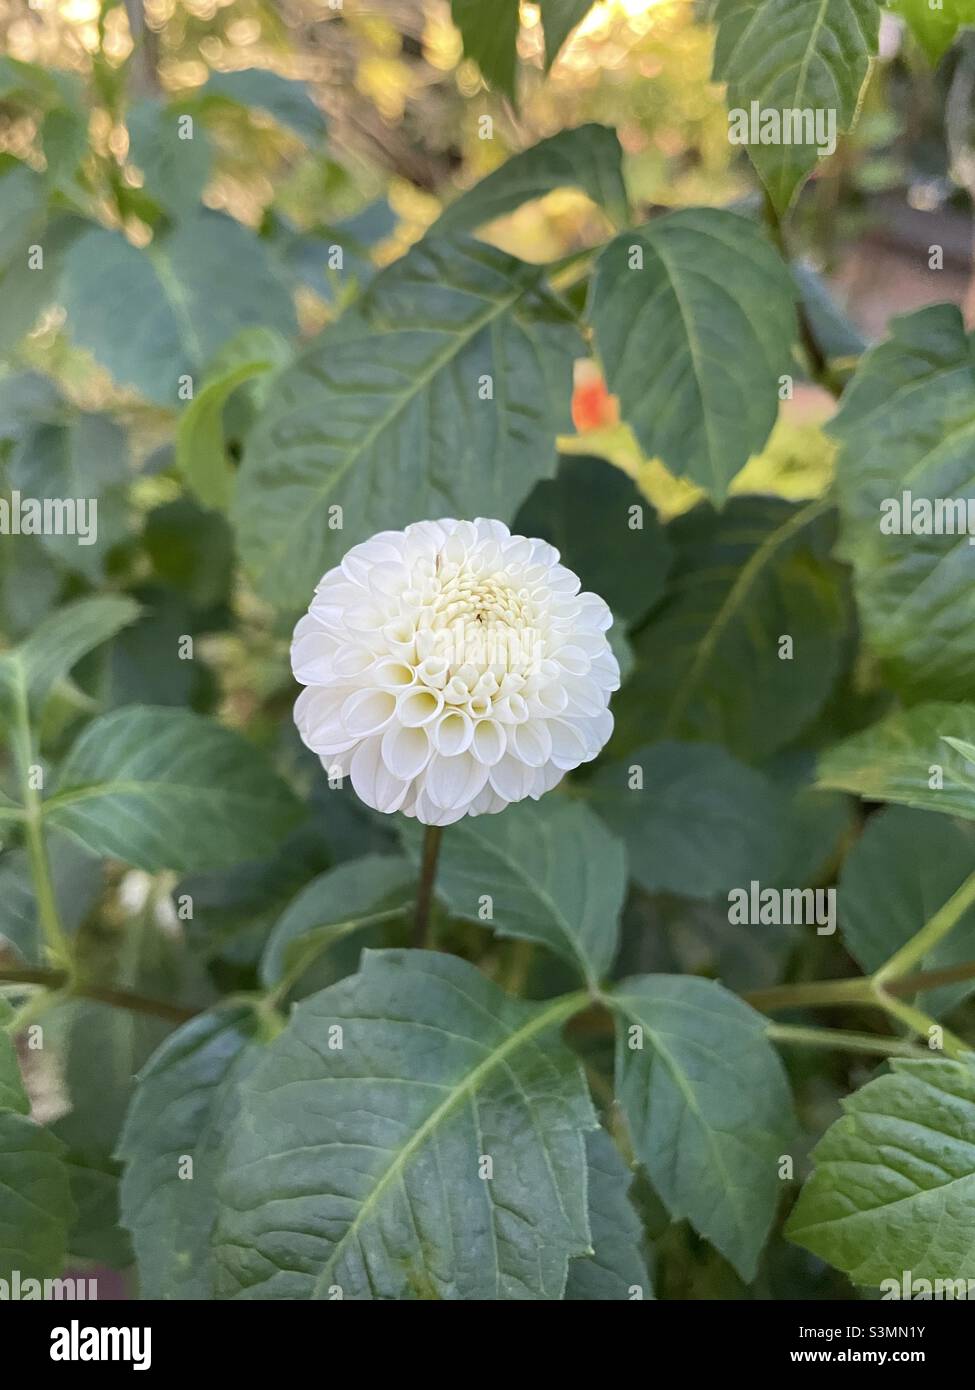 White dahlia bloom against a bed of leaves Stock Photo